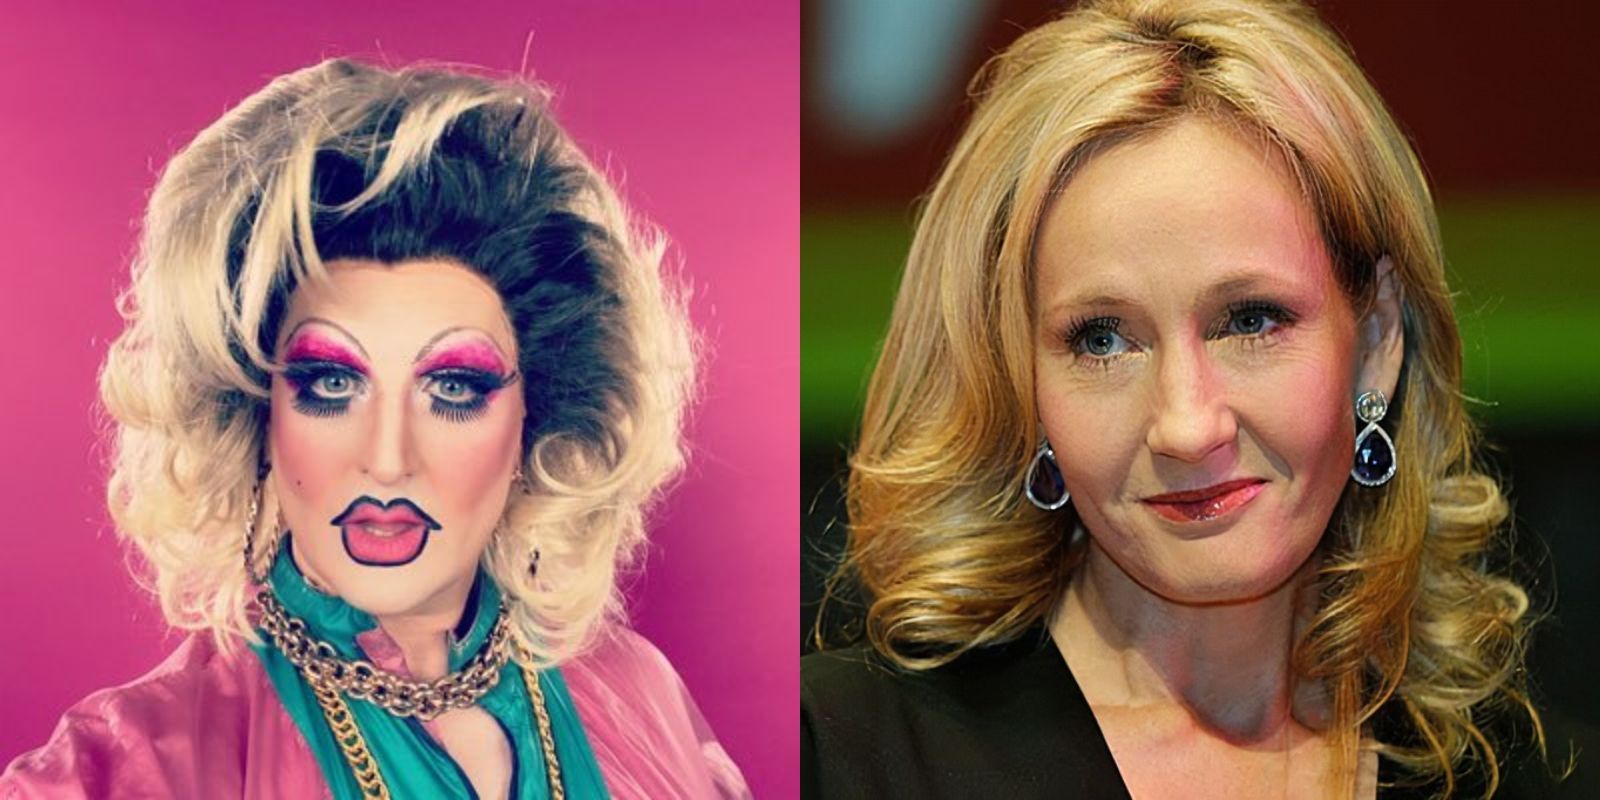 Drag queen doxxes JK Rowling's house, then takes pic down lying about 'transphobic' comments